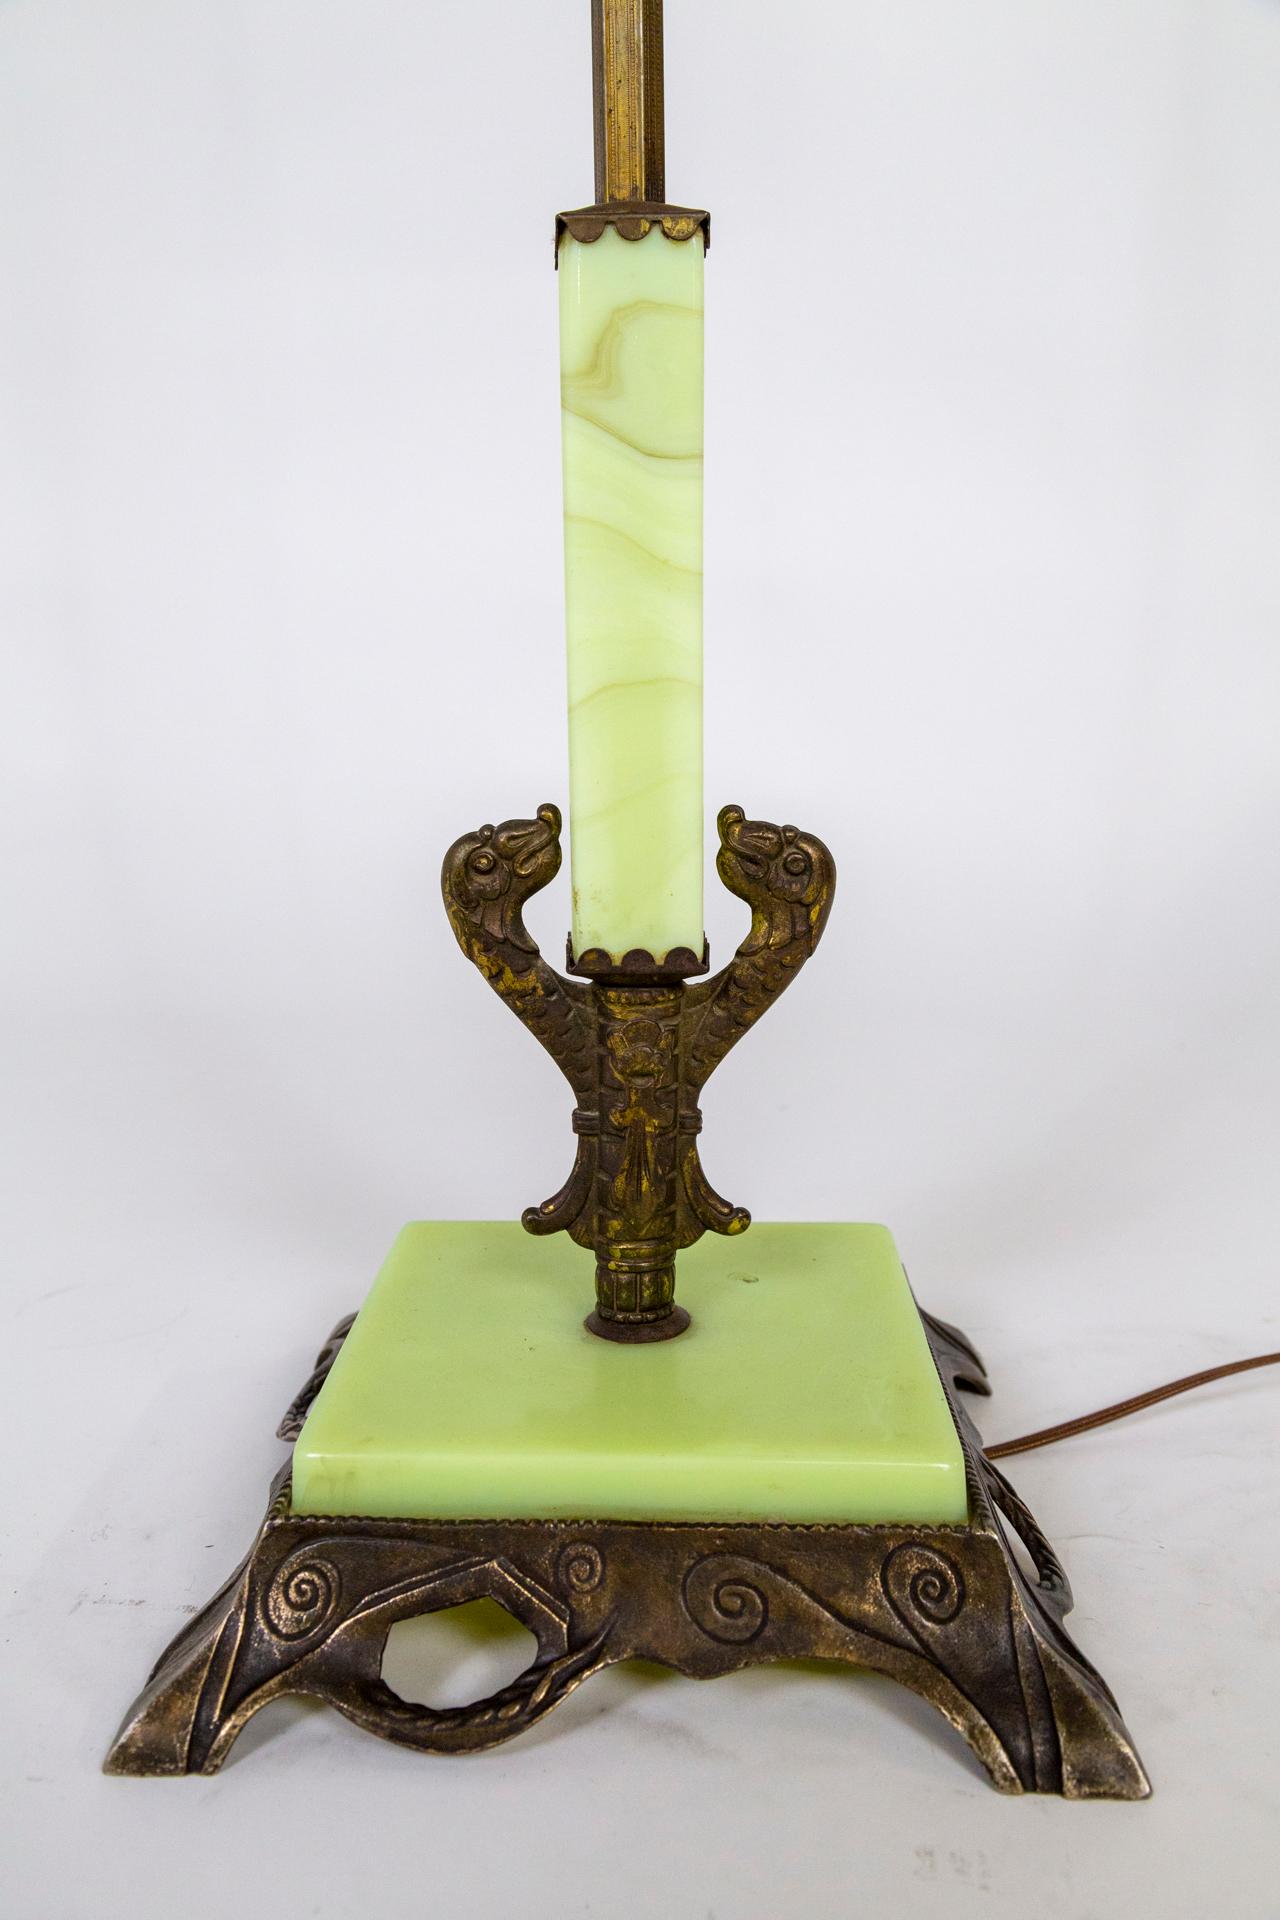 An early 20th century floor lamp with a reeded, brass stem with segments of uranium, yellow-green glass throughout; accented with a blown glass amber and white bead. It has a decoratively cast, solid base with organic and fauna details and topped